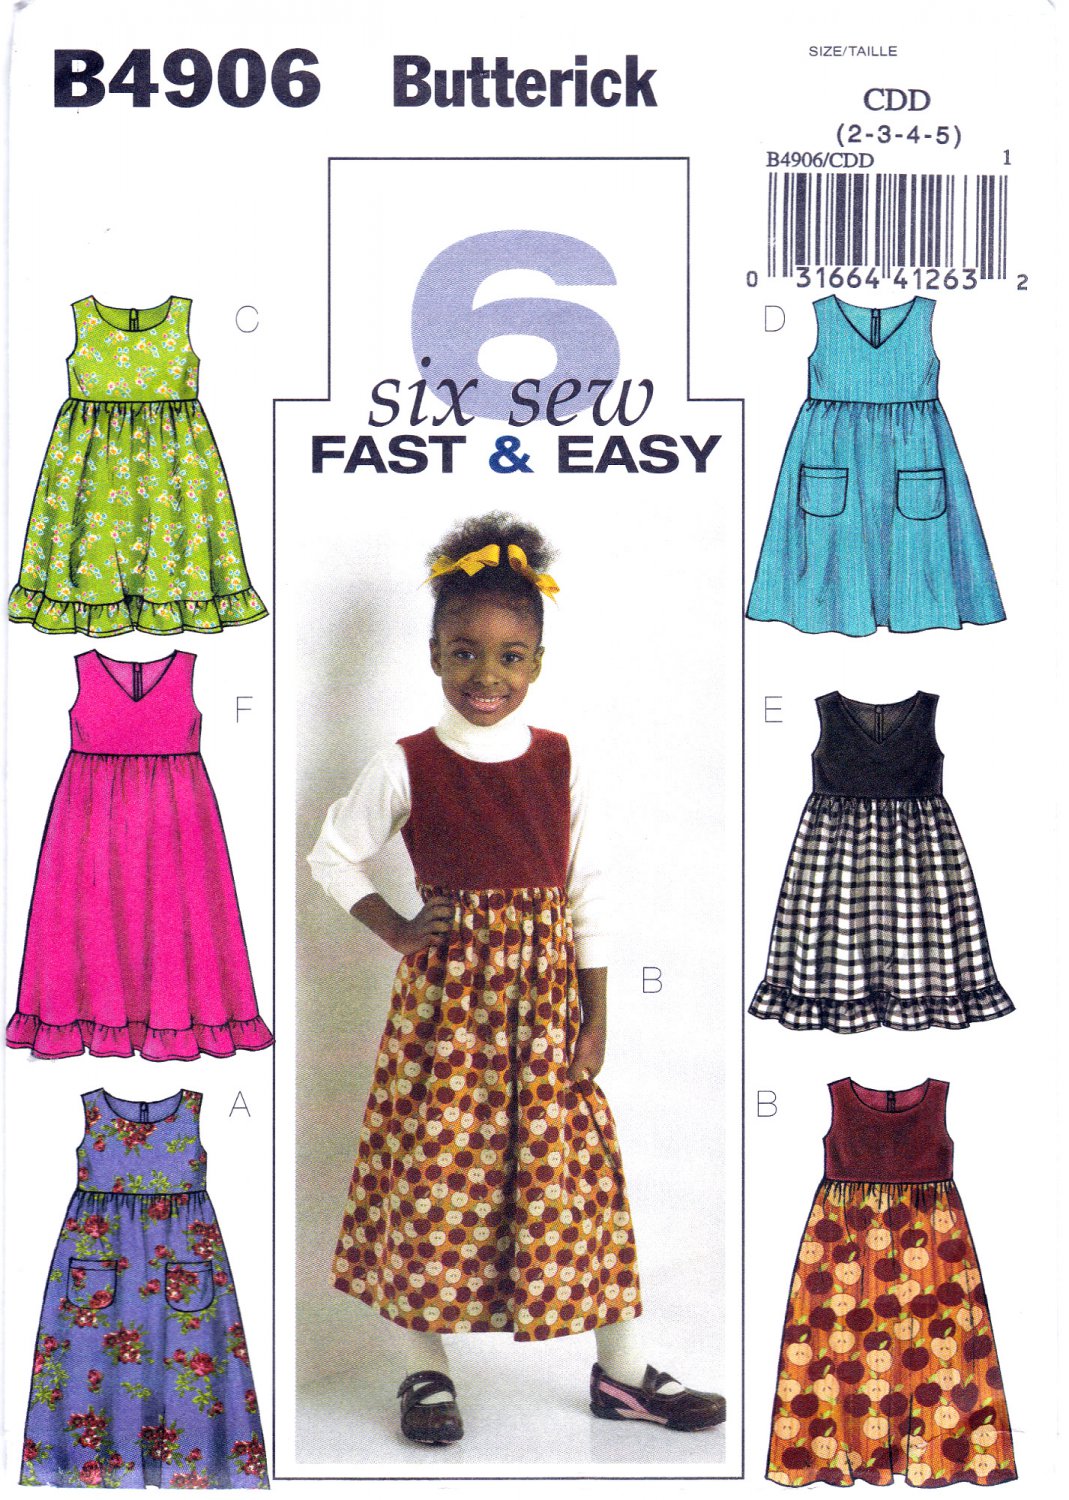 Butterick 4906 B4906 Girls Dresses Sewing Pattern Childrens 6 Easy Sew Looks Kids Sizes 2-3-4-5